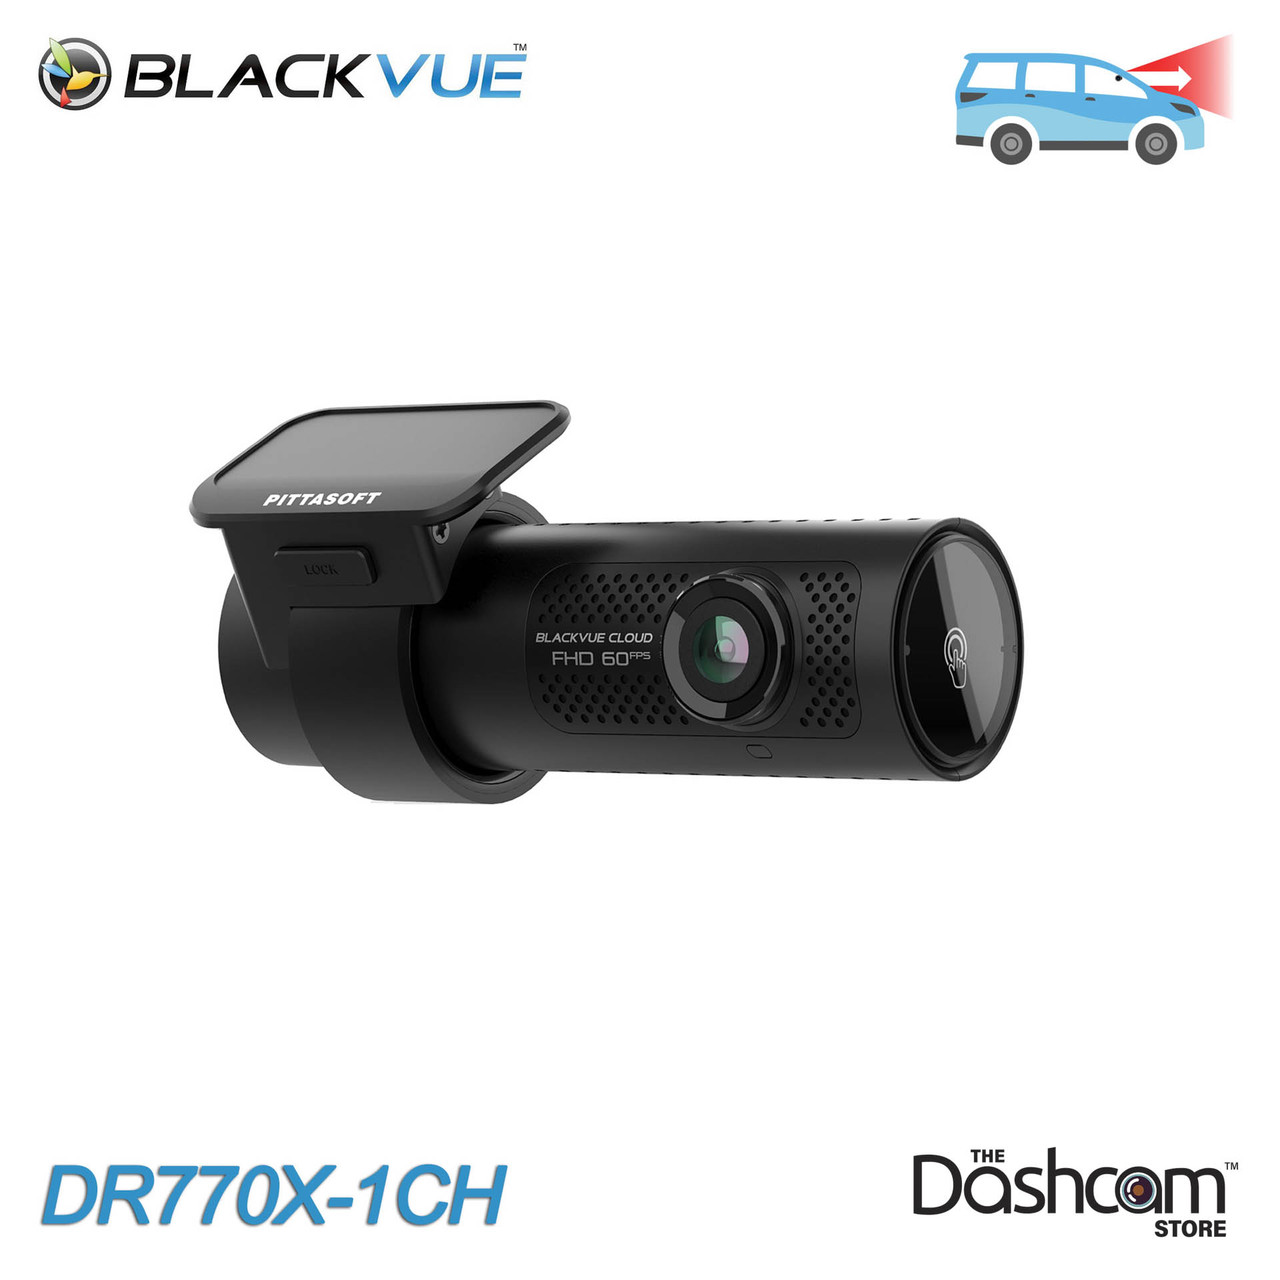 https://cdn11.bigcommerce.com/s-za60ms/images/stencil/1280x1280/products/864/13327/thedashcamstore.com-dr770x-1ch-dash-cam-2__79319.1678122291.jpg?c=2